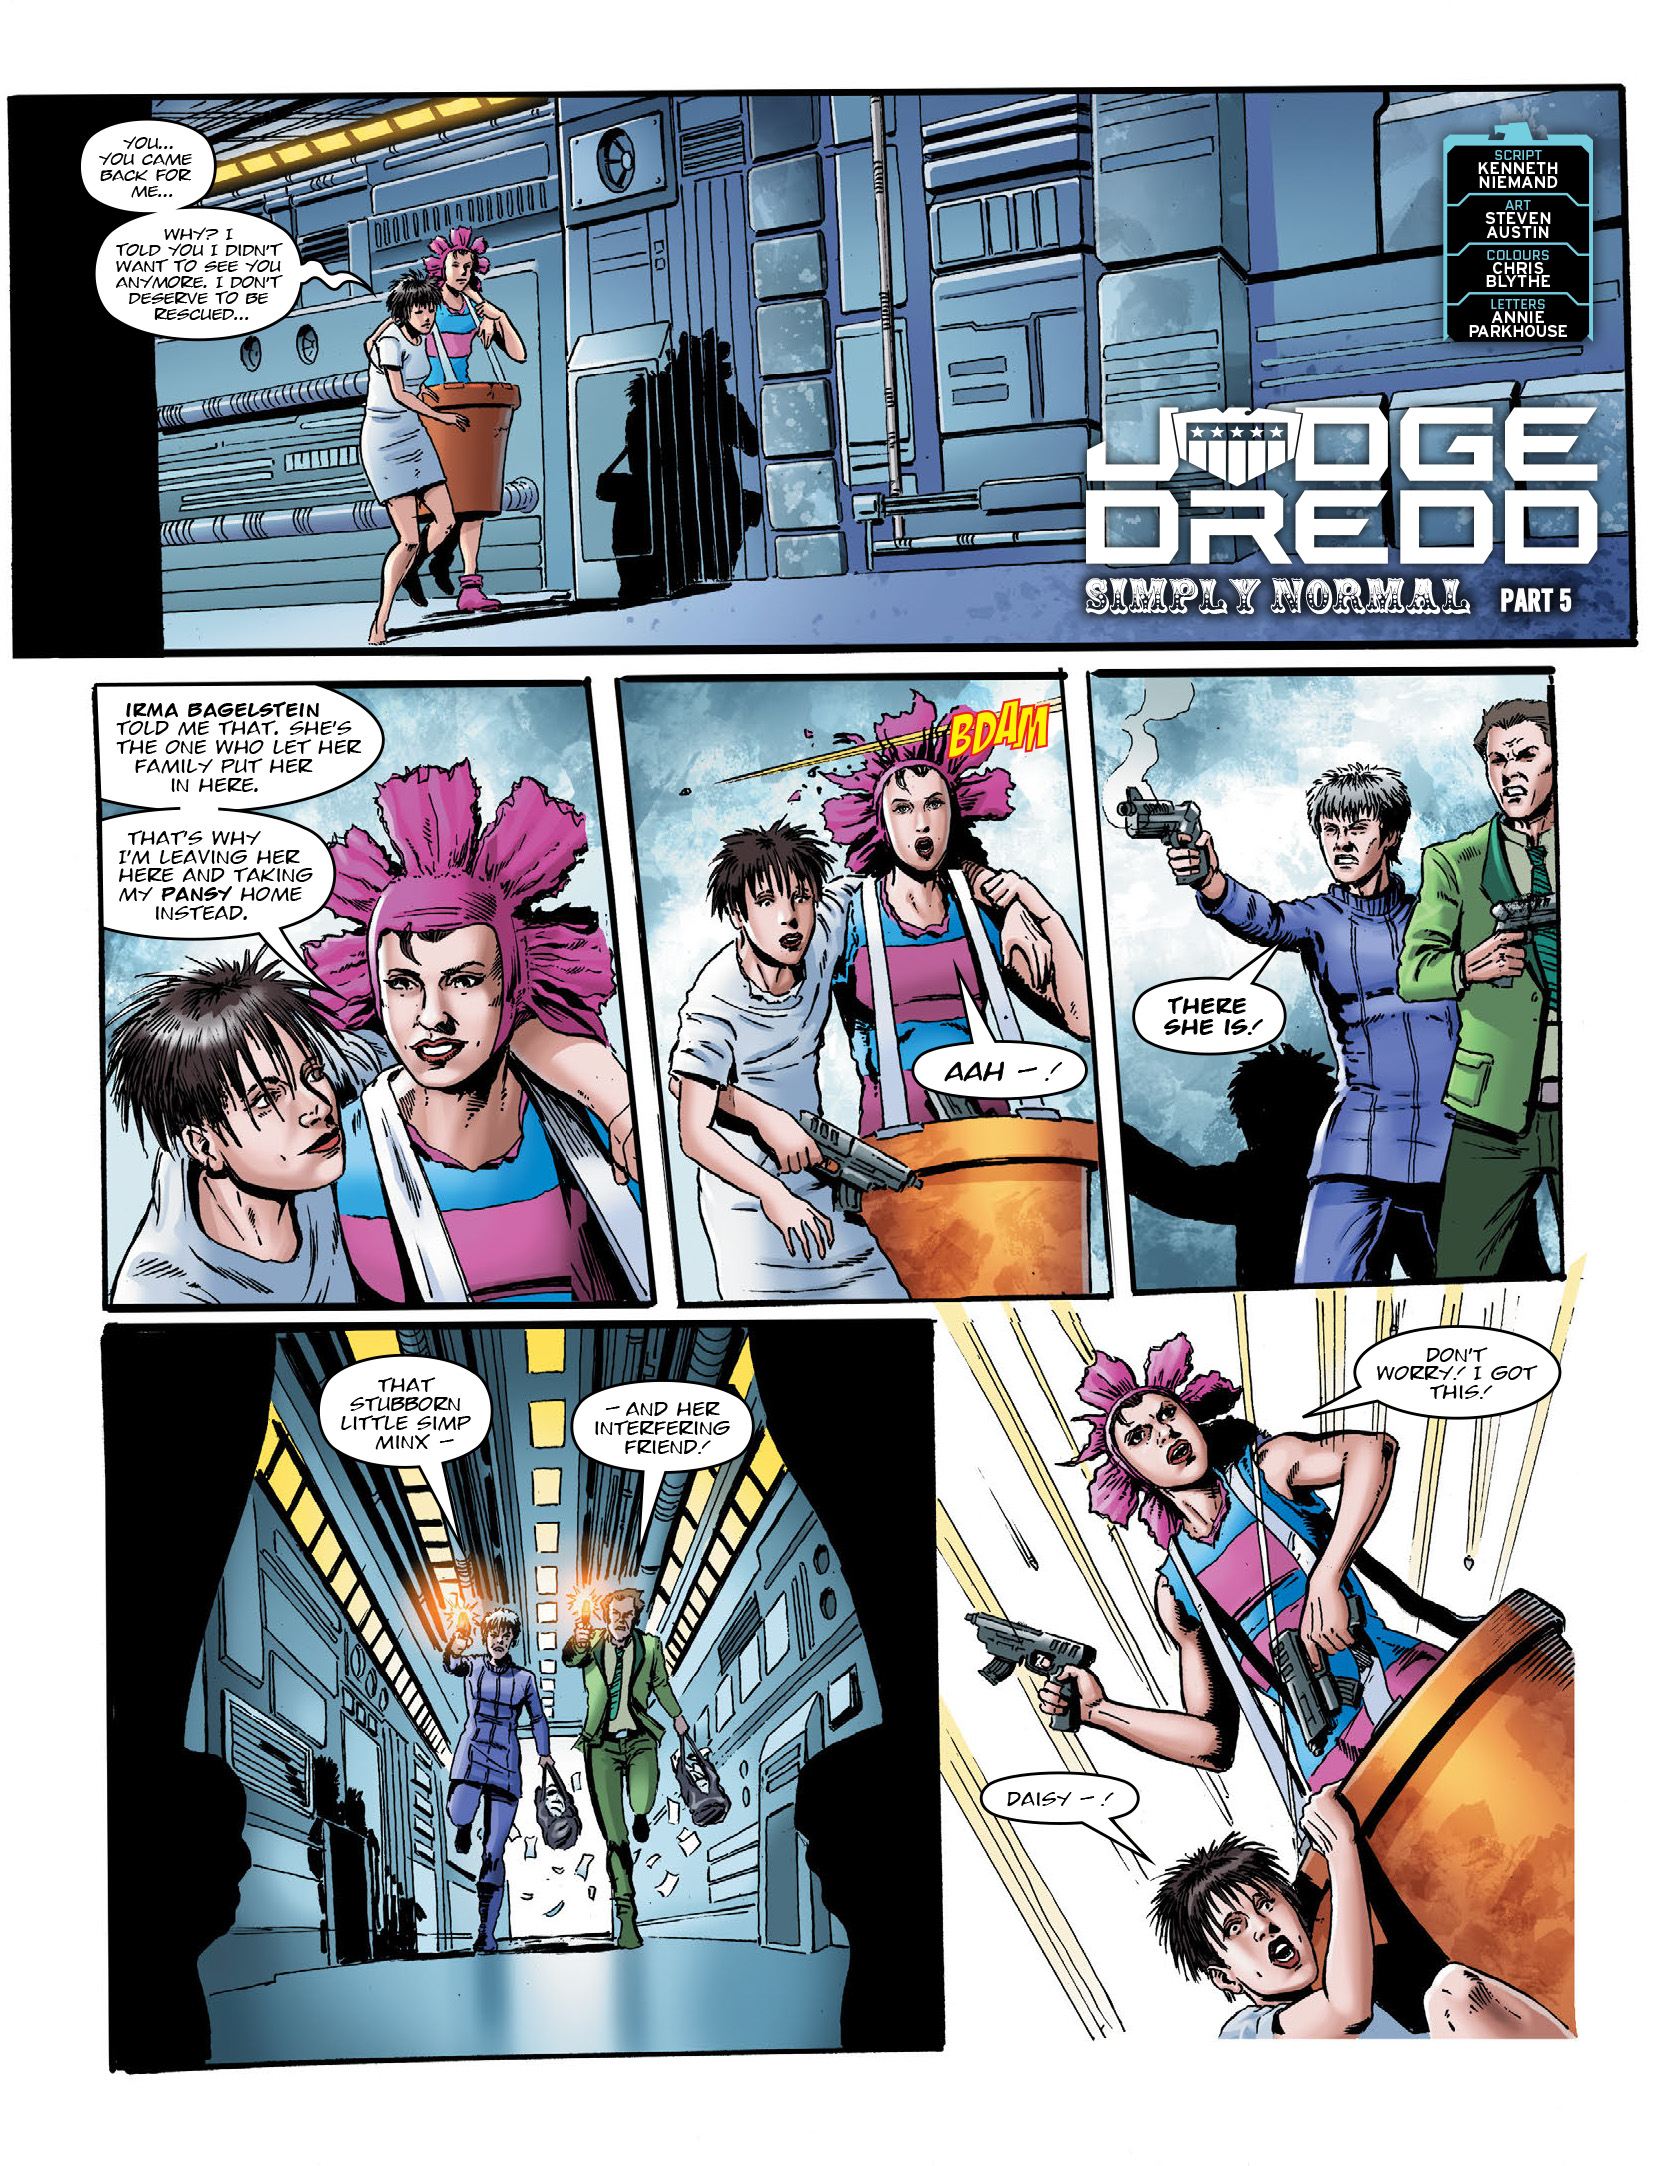 2000 AD: Chapter 2211 - Page 3